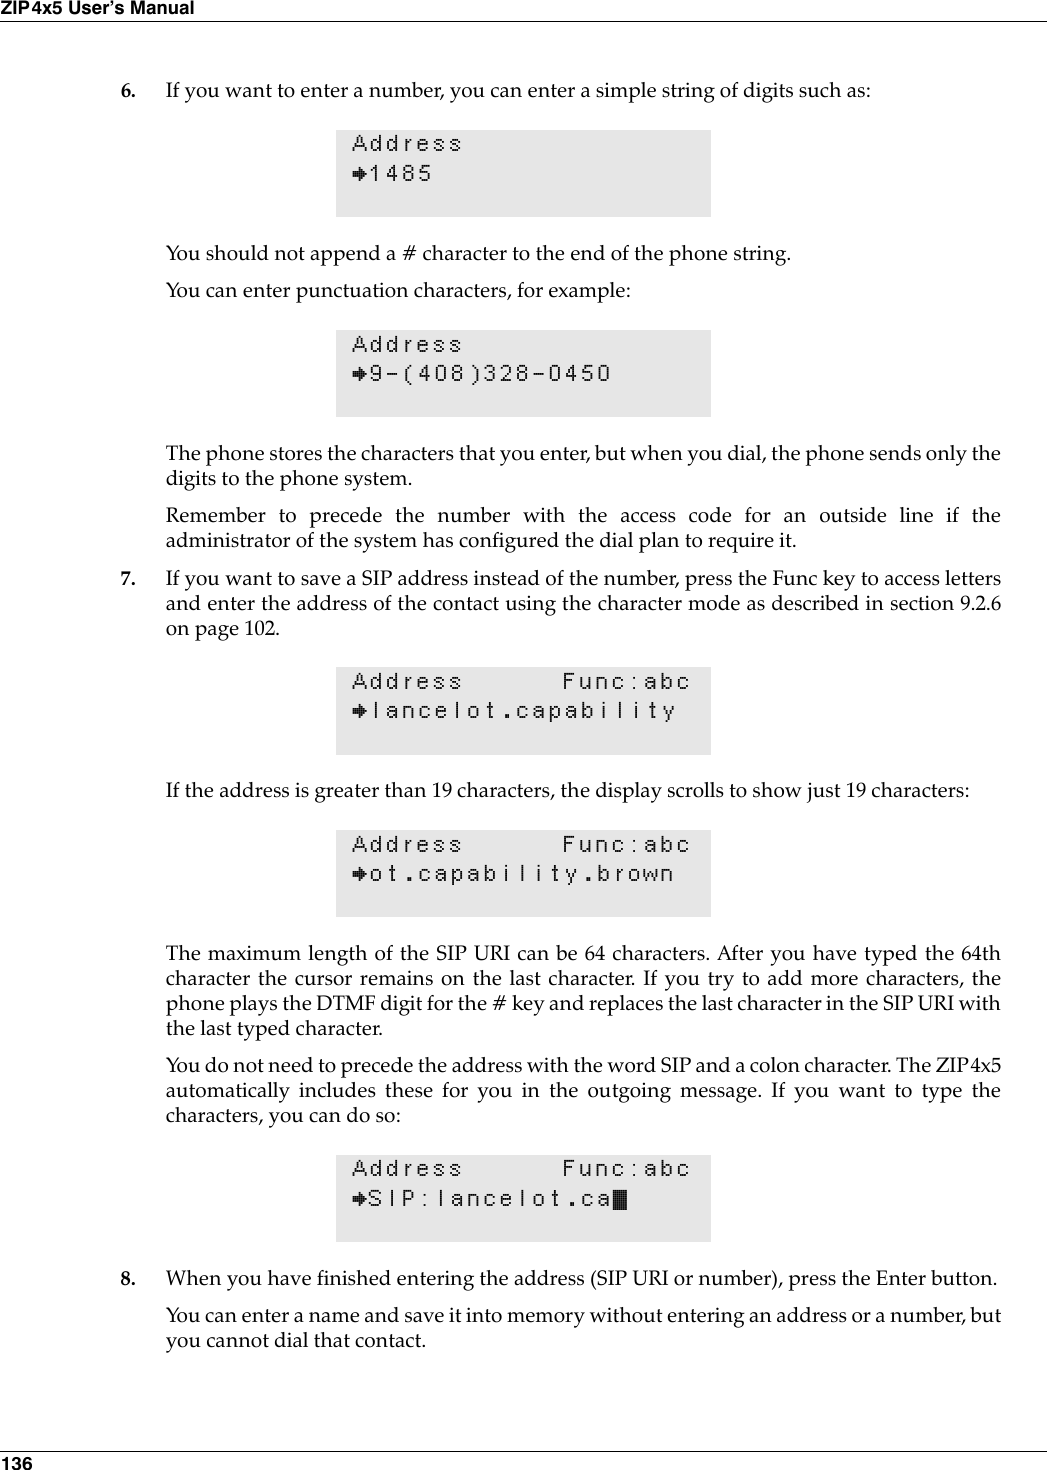 136ZIP4x5 User’s Manual6. If you want to enter a number, you can enter a simple string of digits such as:You should not append a # character to the end of the phone string.You can enter punctuation characters, for example:The phone stores the characters that you enter, but when you dial, the phone sends only thedigits to the phone system.Remember to precede the number with the access code for an outside line if theadministrator of the system has configured the dial plan to require it. 7. If you want to save a SIP address instead of the number, press the Func key to access lettersand enter the address of the contact using the character mode as described in section 9.2.6on page 102.If the address is greater than 19 characters, the display scrolls to show just 19 characters:The maximum length of the SIP URI can be 64 characters. After you have typed the 64thcharacter the cursor remains on the last character. If you try to add more characters, thephone plays the DTMF digit for the # key and replaces the last character in the SIP URI withthe last typed character.You do not need to precede the address with the word SIP and a colon character. The ZIP4x5automatically includes these for you in the outgoing message. If you want to type thecharacters, you can do so:8. When you have finished entering the address (SIP URI or number), press the Enter button.You can enter a name and save it into memory without entering an address or a number, butyou cannot dial that contact.Address}1485Address}9-(408)328-0450Address Func:abc}lancelot.capabilityAddress Func:abc}ot.capability.brownAddress Func:abc}SIP:lancelot.ca•